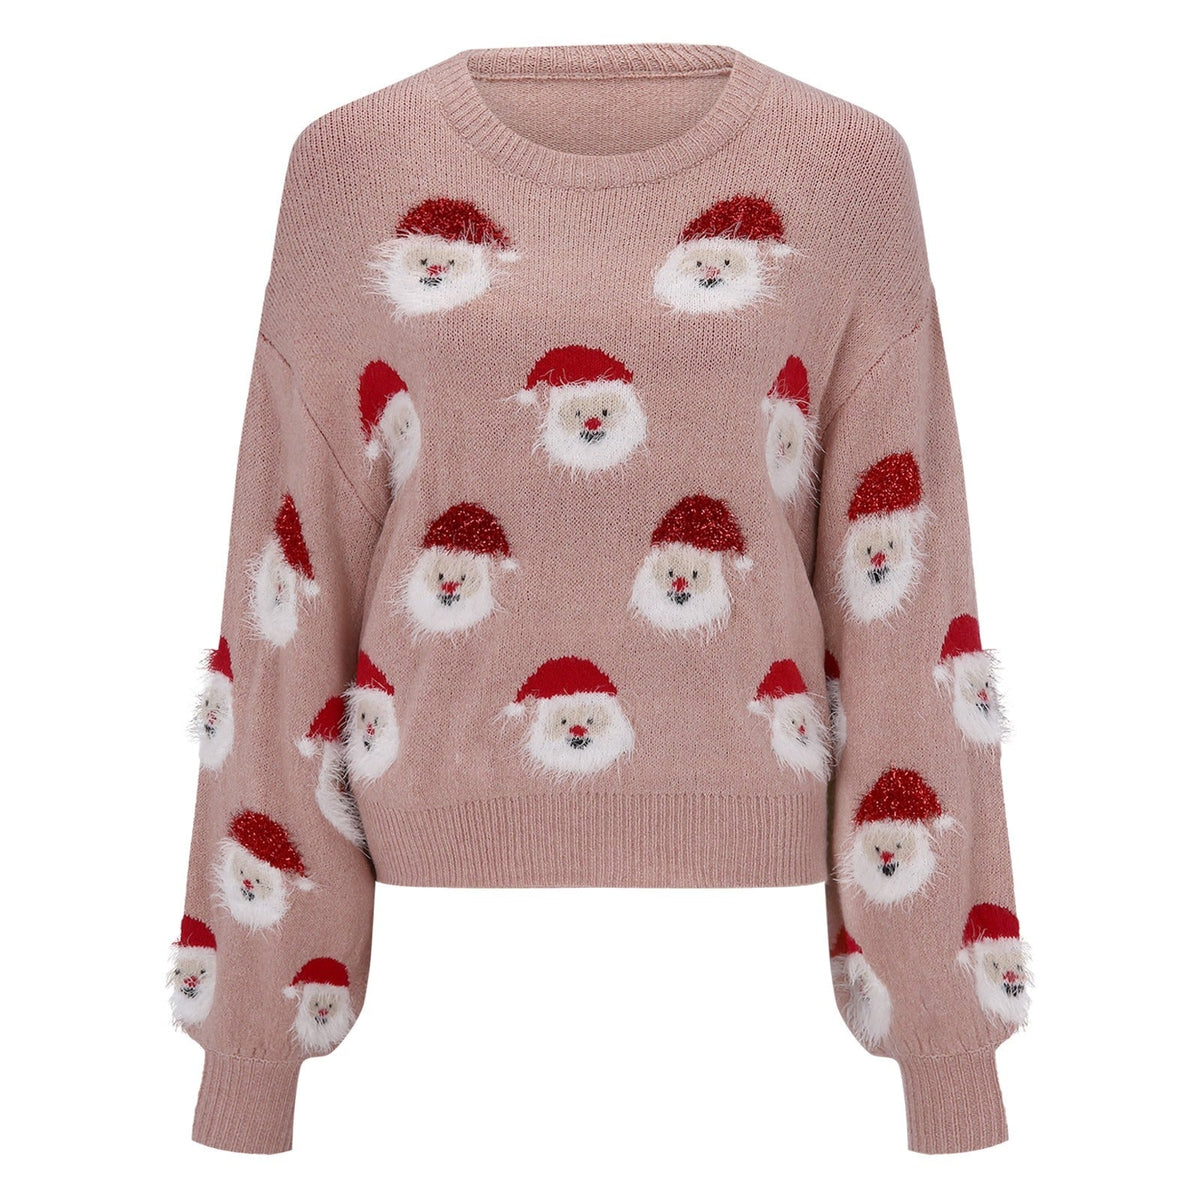 Cute Christmas Knitted Sweater